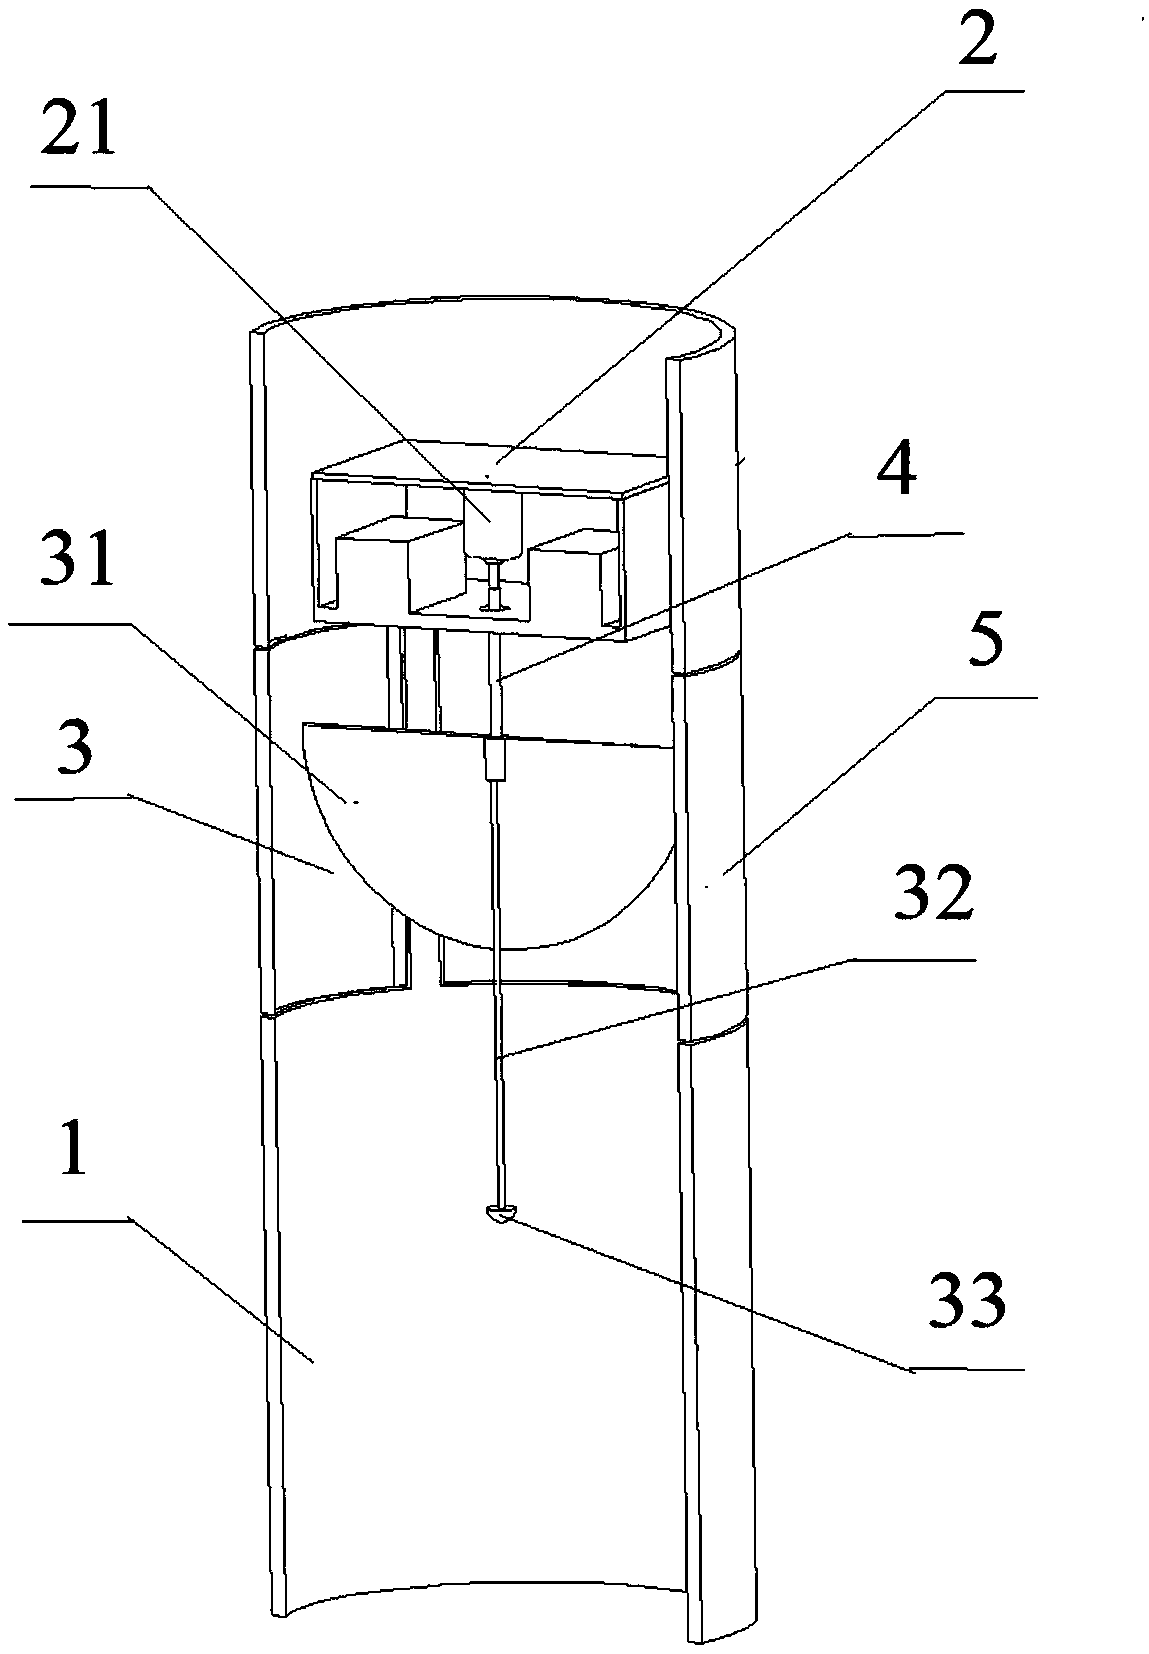 Plumb weight measurable deflection device